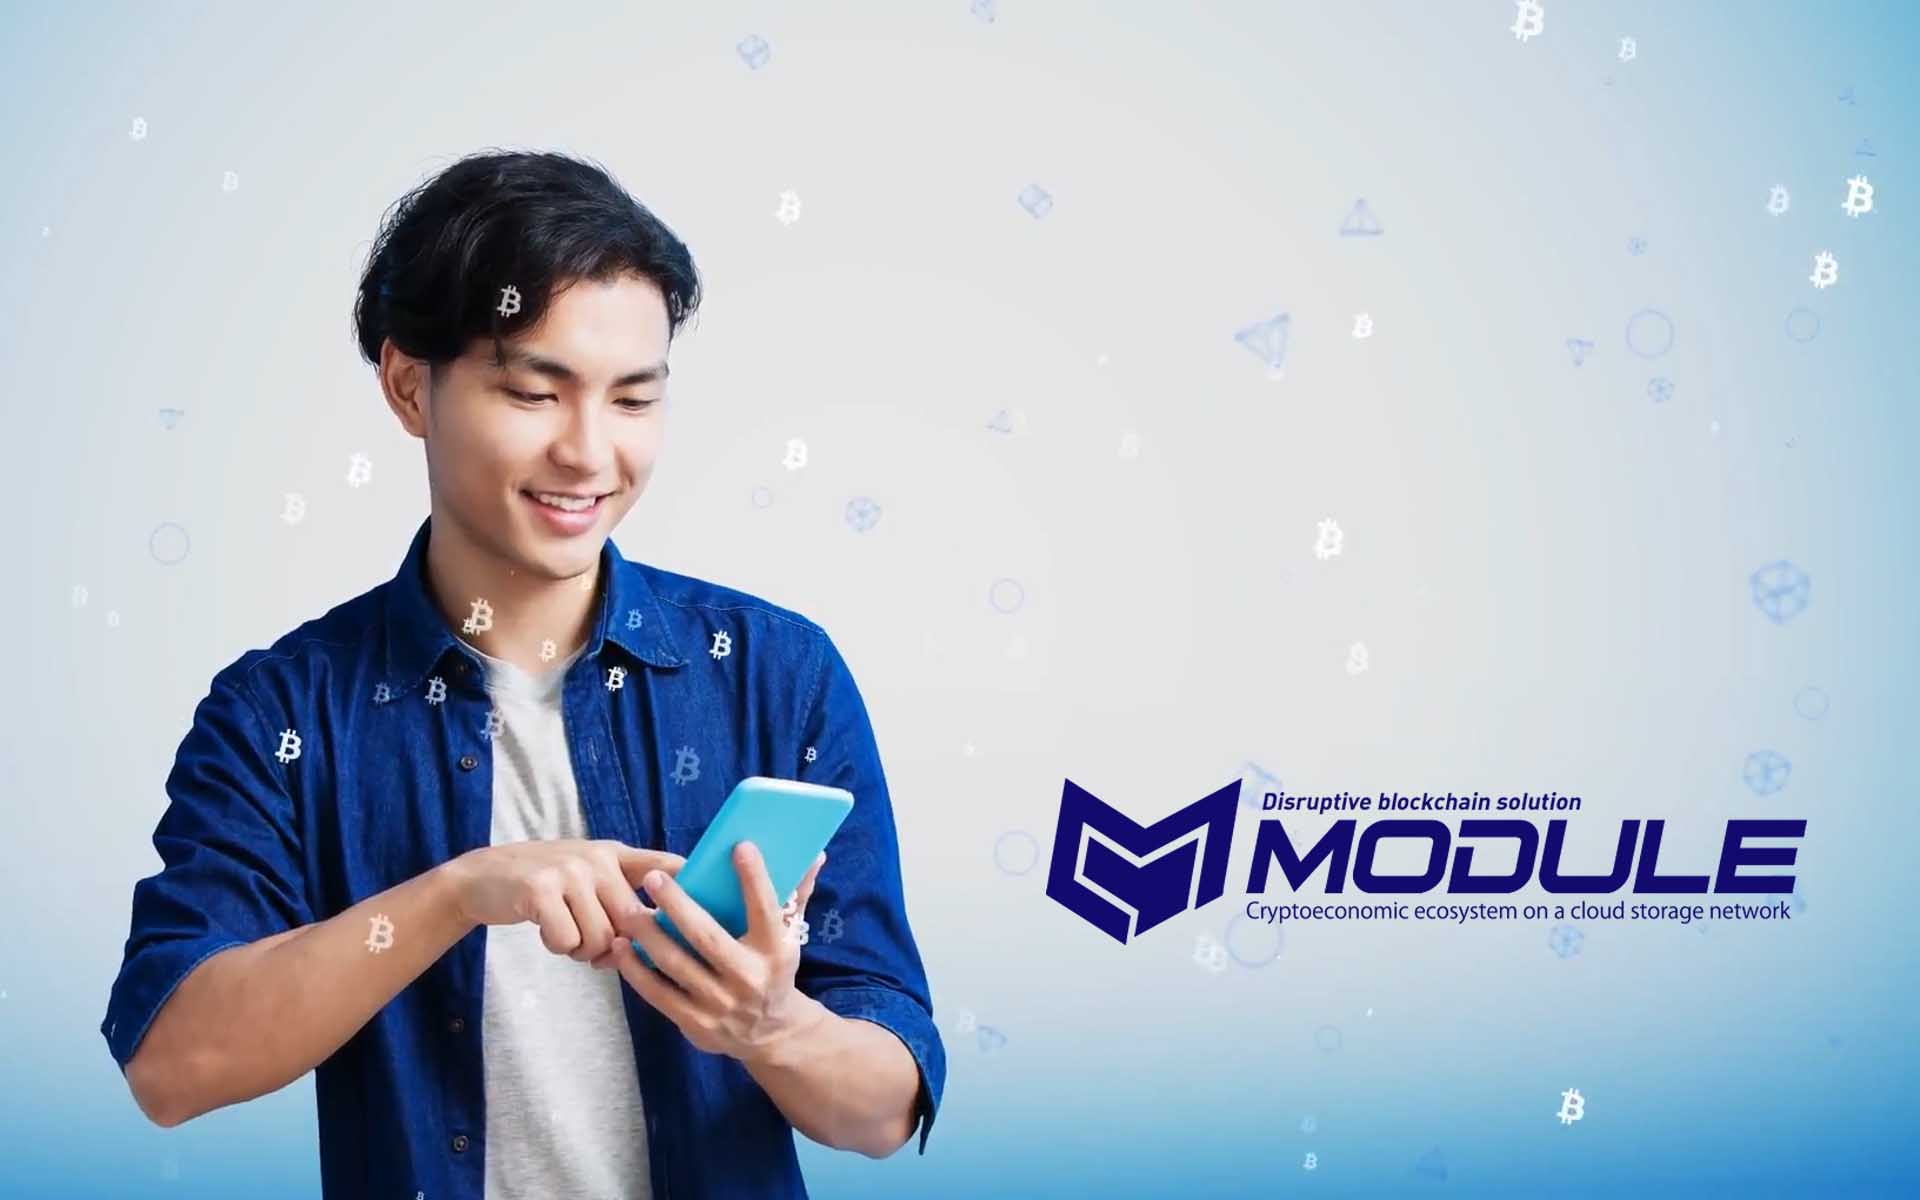 Japan’s Module Platform Offers Users the Chance to Earn Cryptocurrency with Their Gadgets